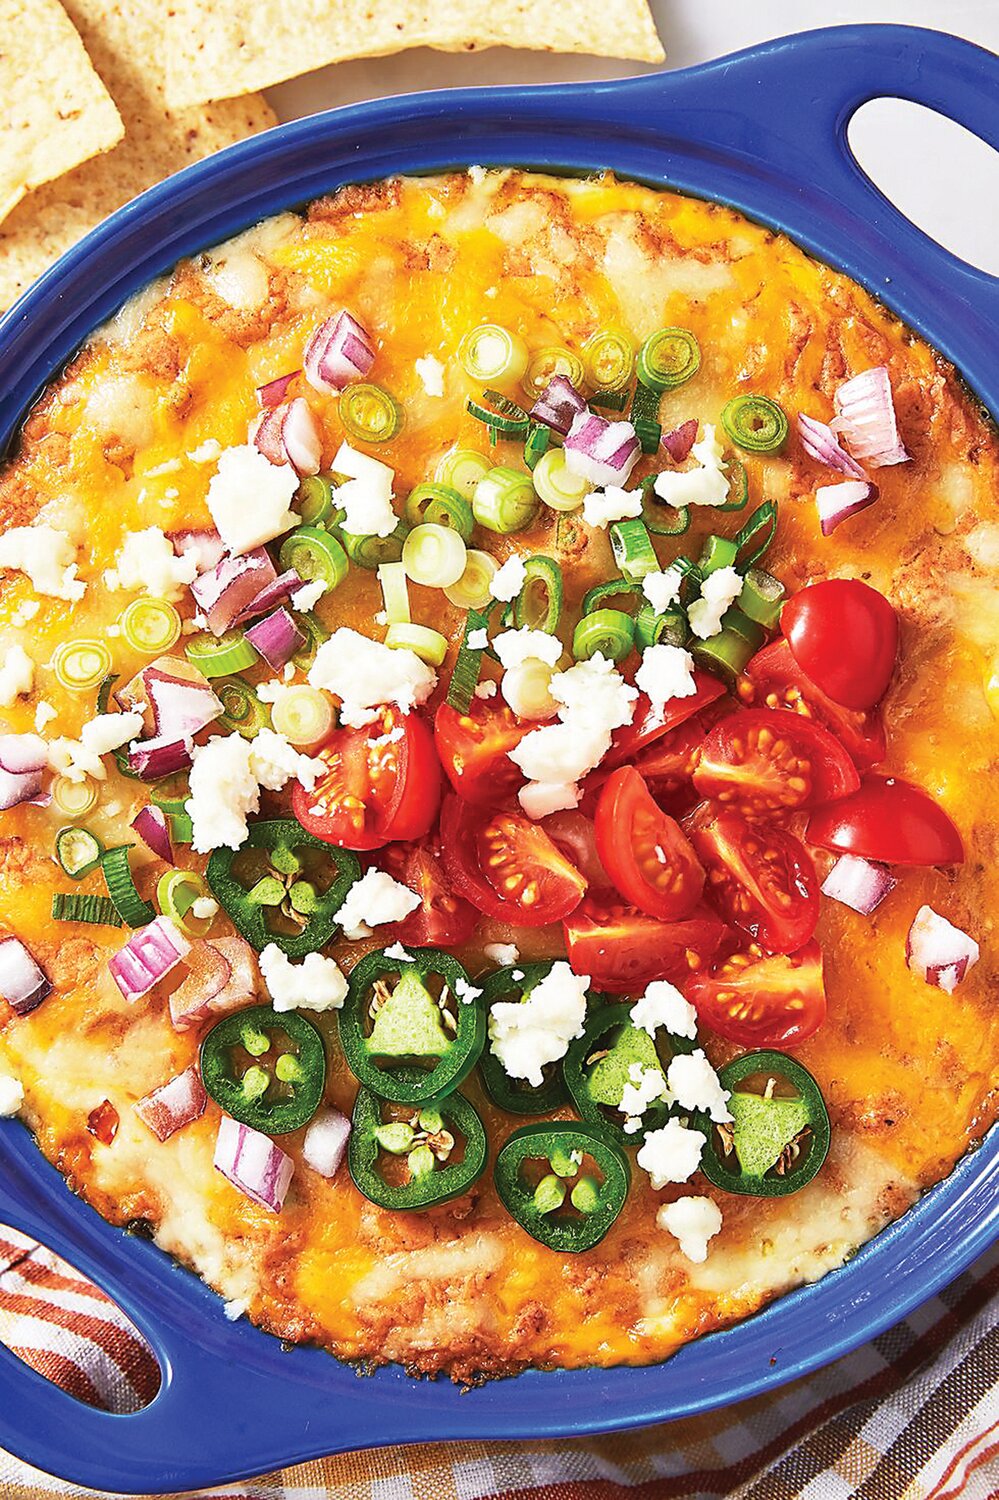 Refried bean dip is one dish you can enjoy when celebrating Cinco de Mayo. Pair it with quesadillas, tacos or enchiladas.